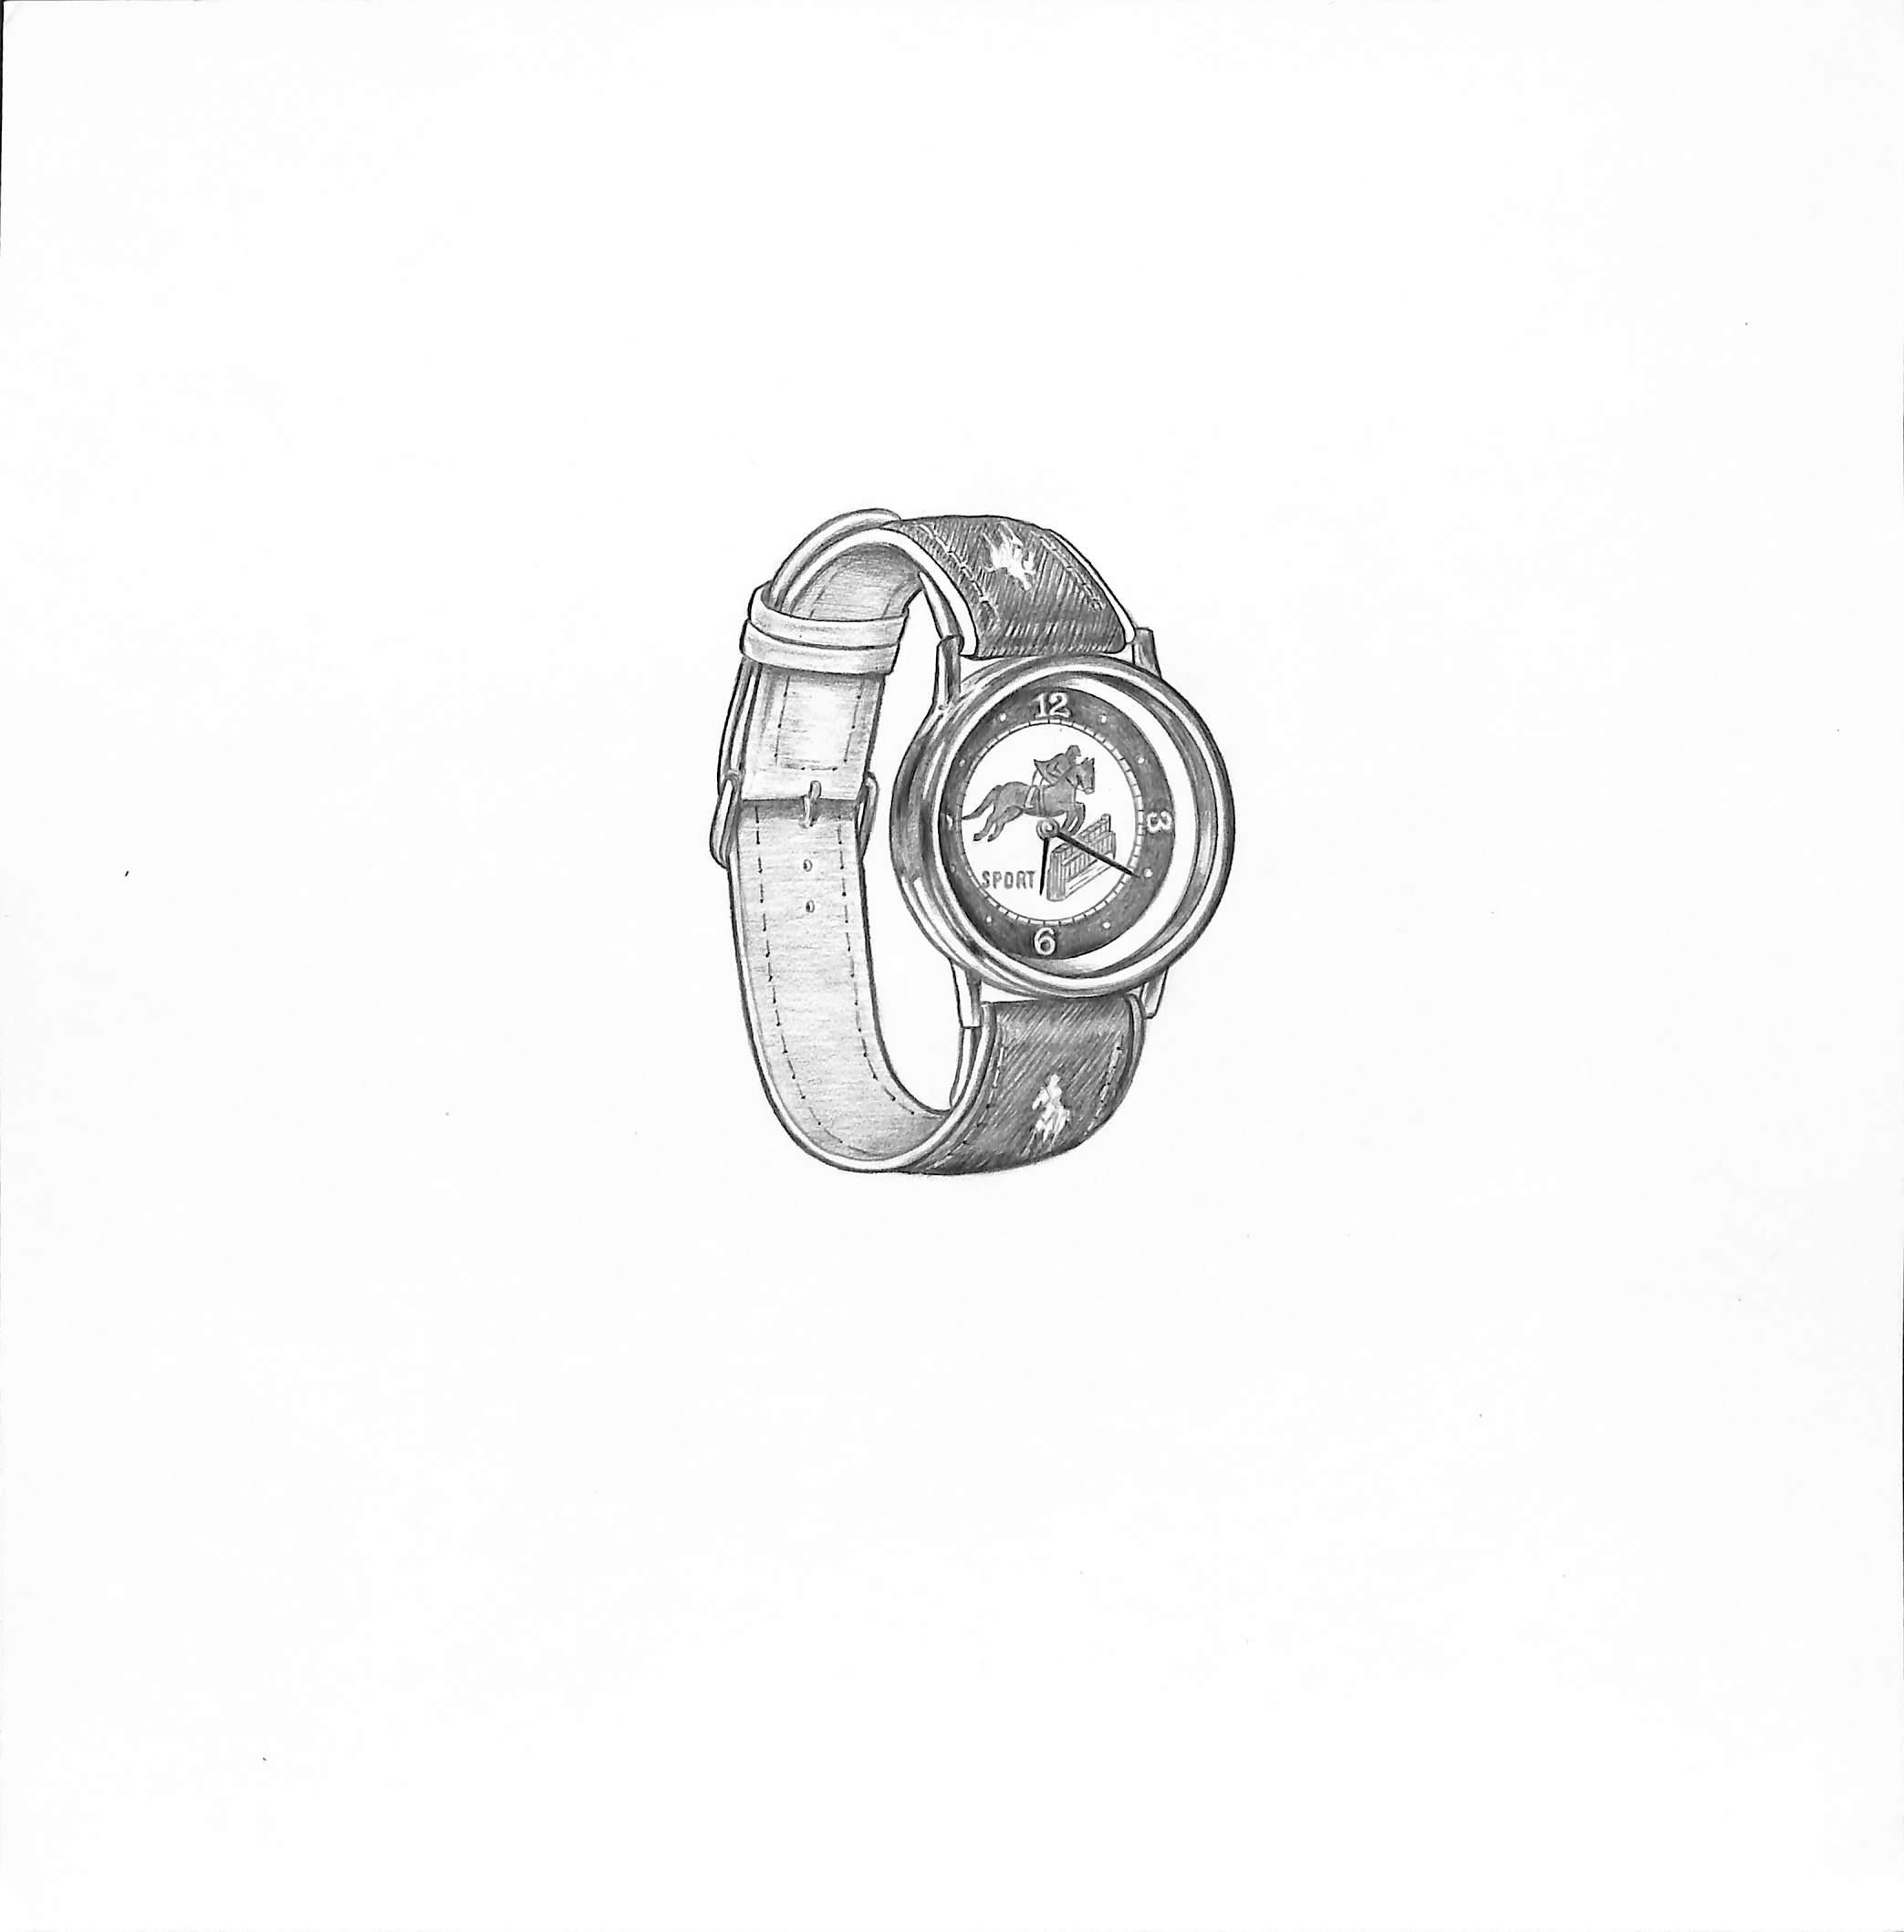 Show Jumper Wristwatch Graphite Drawing - Art by Unknown